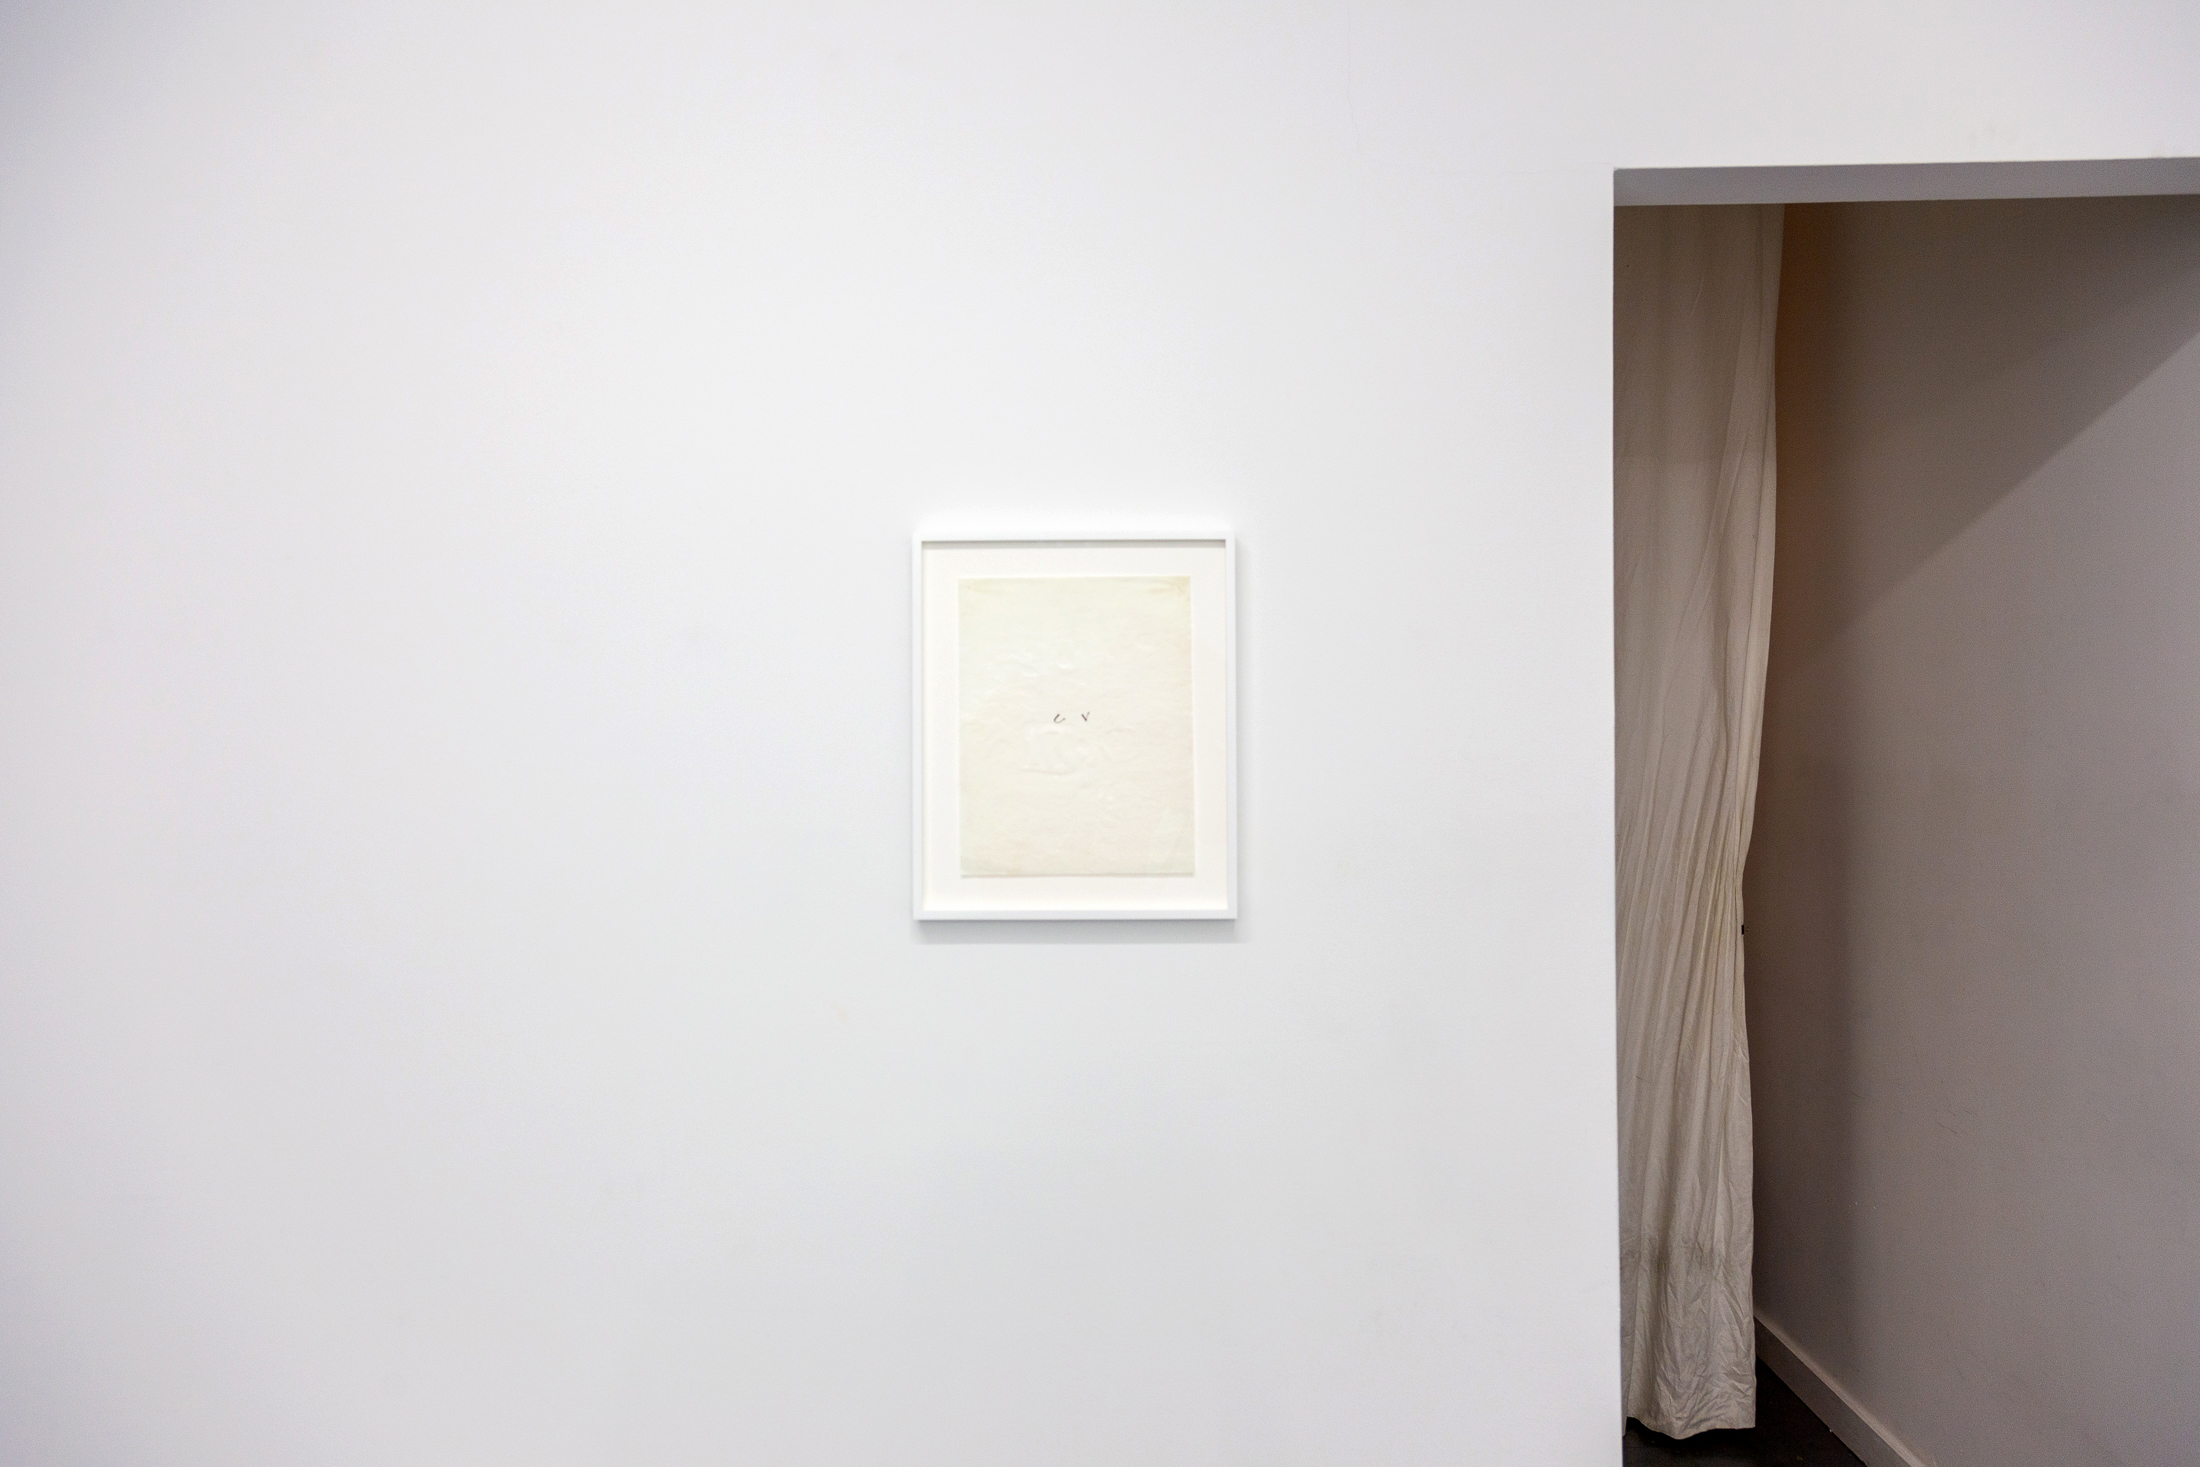  Installation view of Joy Episalla and Carrie Yamaoka at Transmitter 